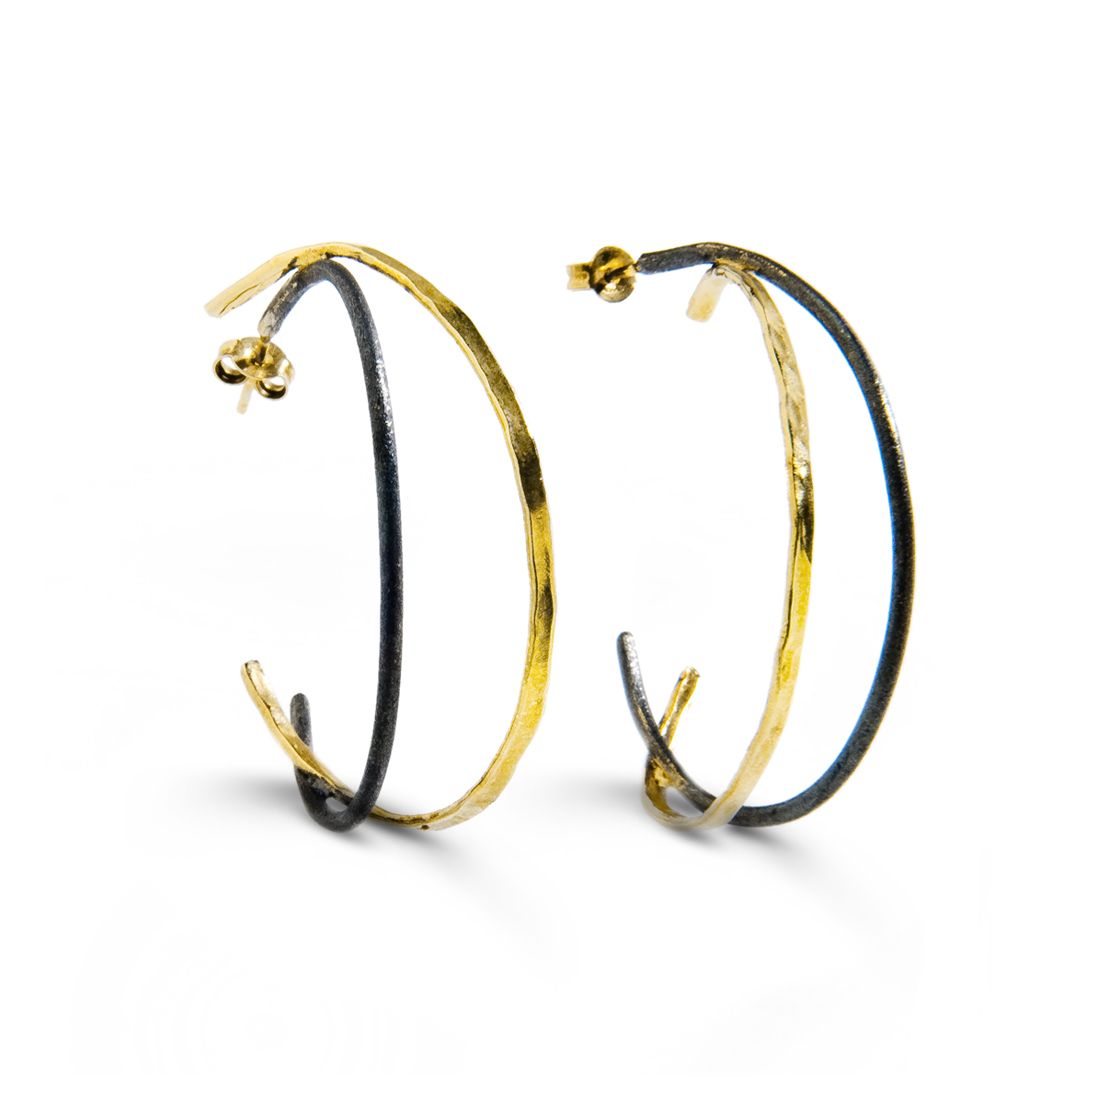 Hoop earrings that emphasize the subtle balance between black and gold.